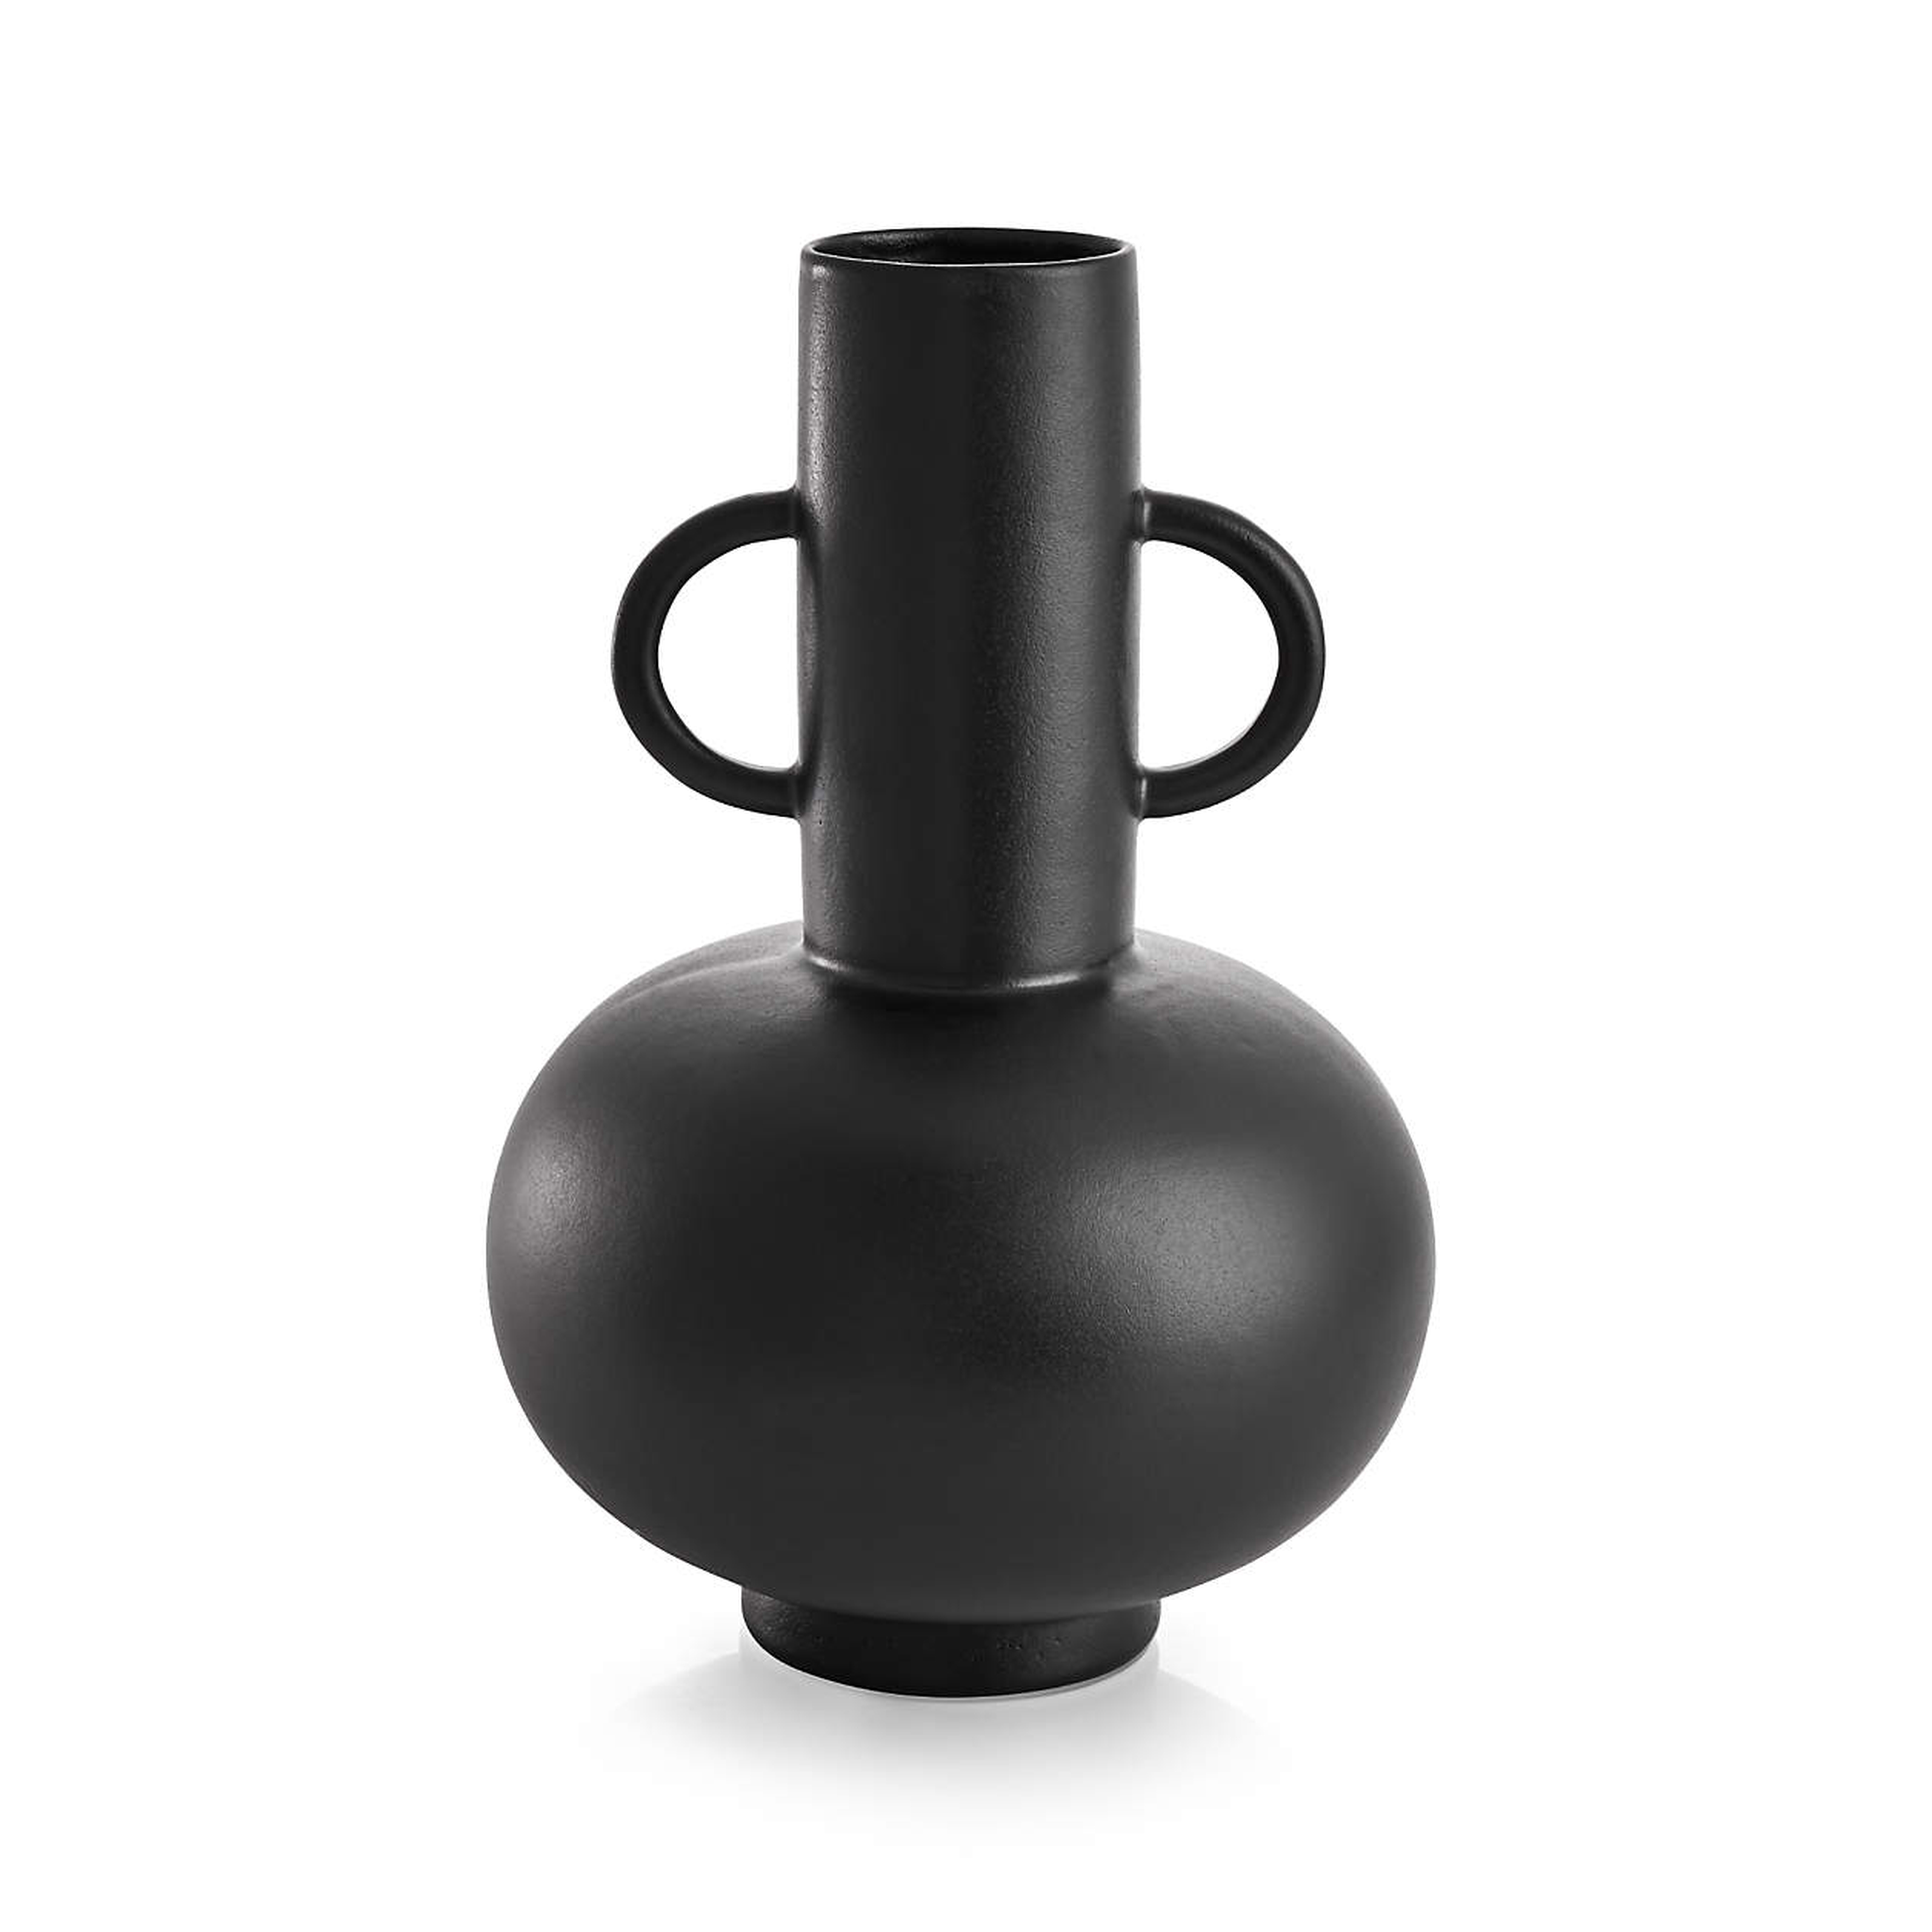 Merriman Black Vase by Leanne Ford - Crate and Barrel